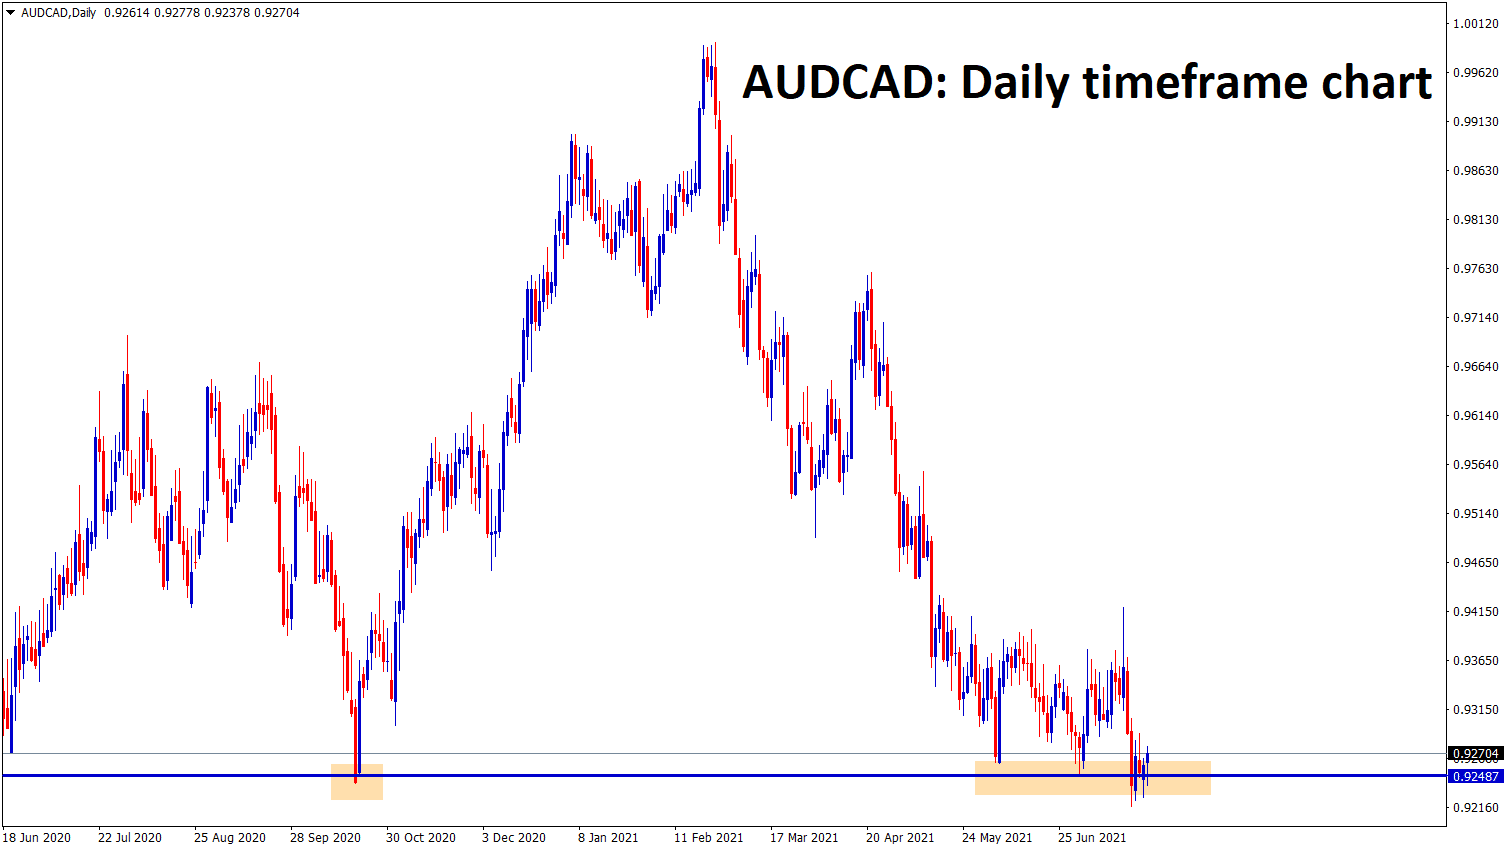 AUDCAD is consolidating at the strong support zone wait for the breakout from this small consolidation zone